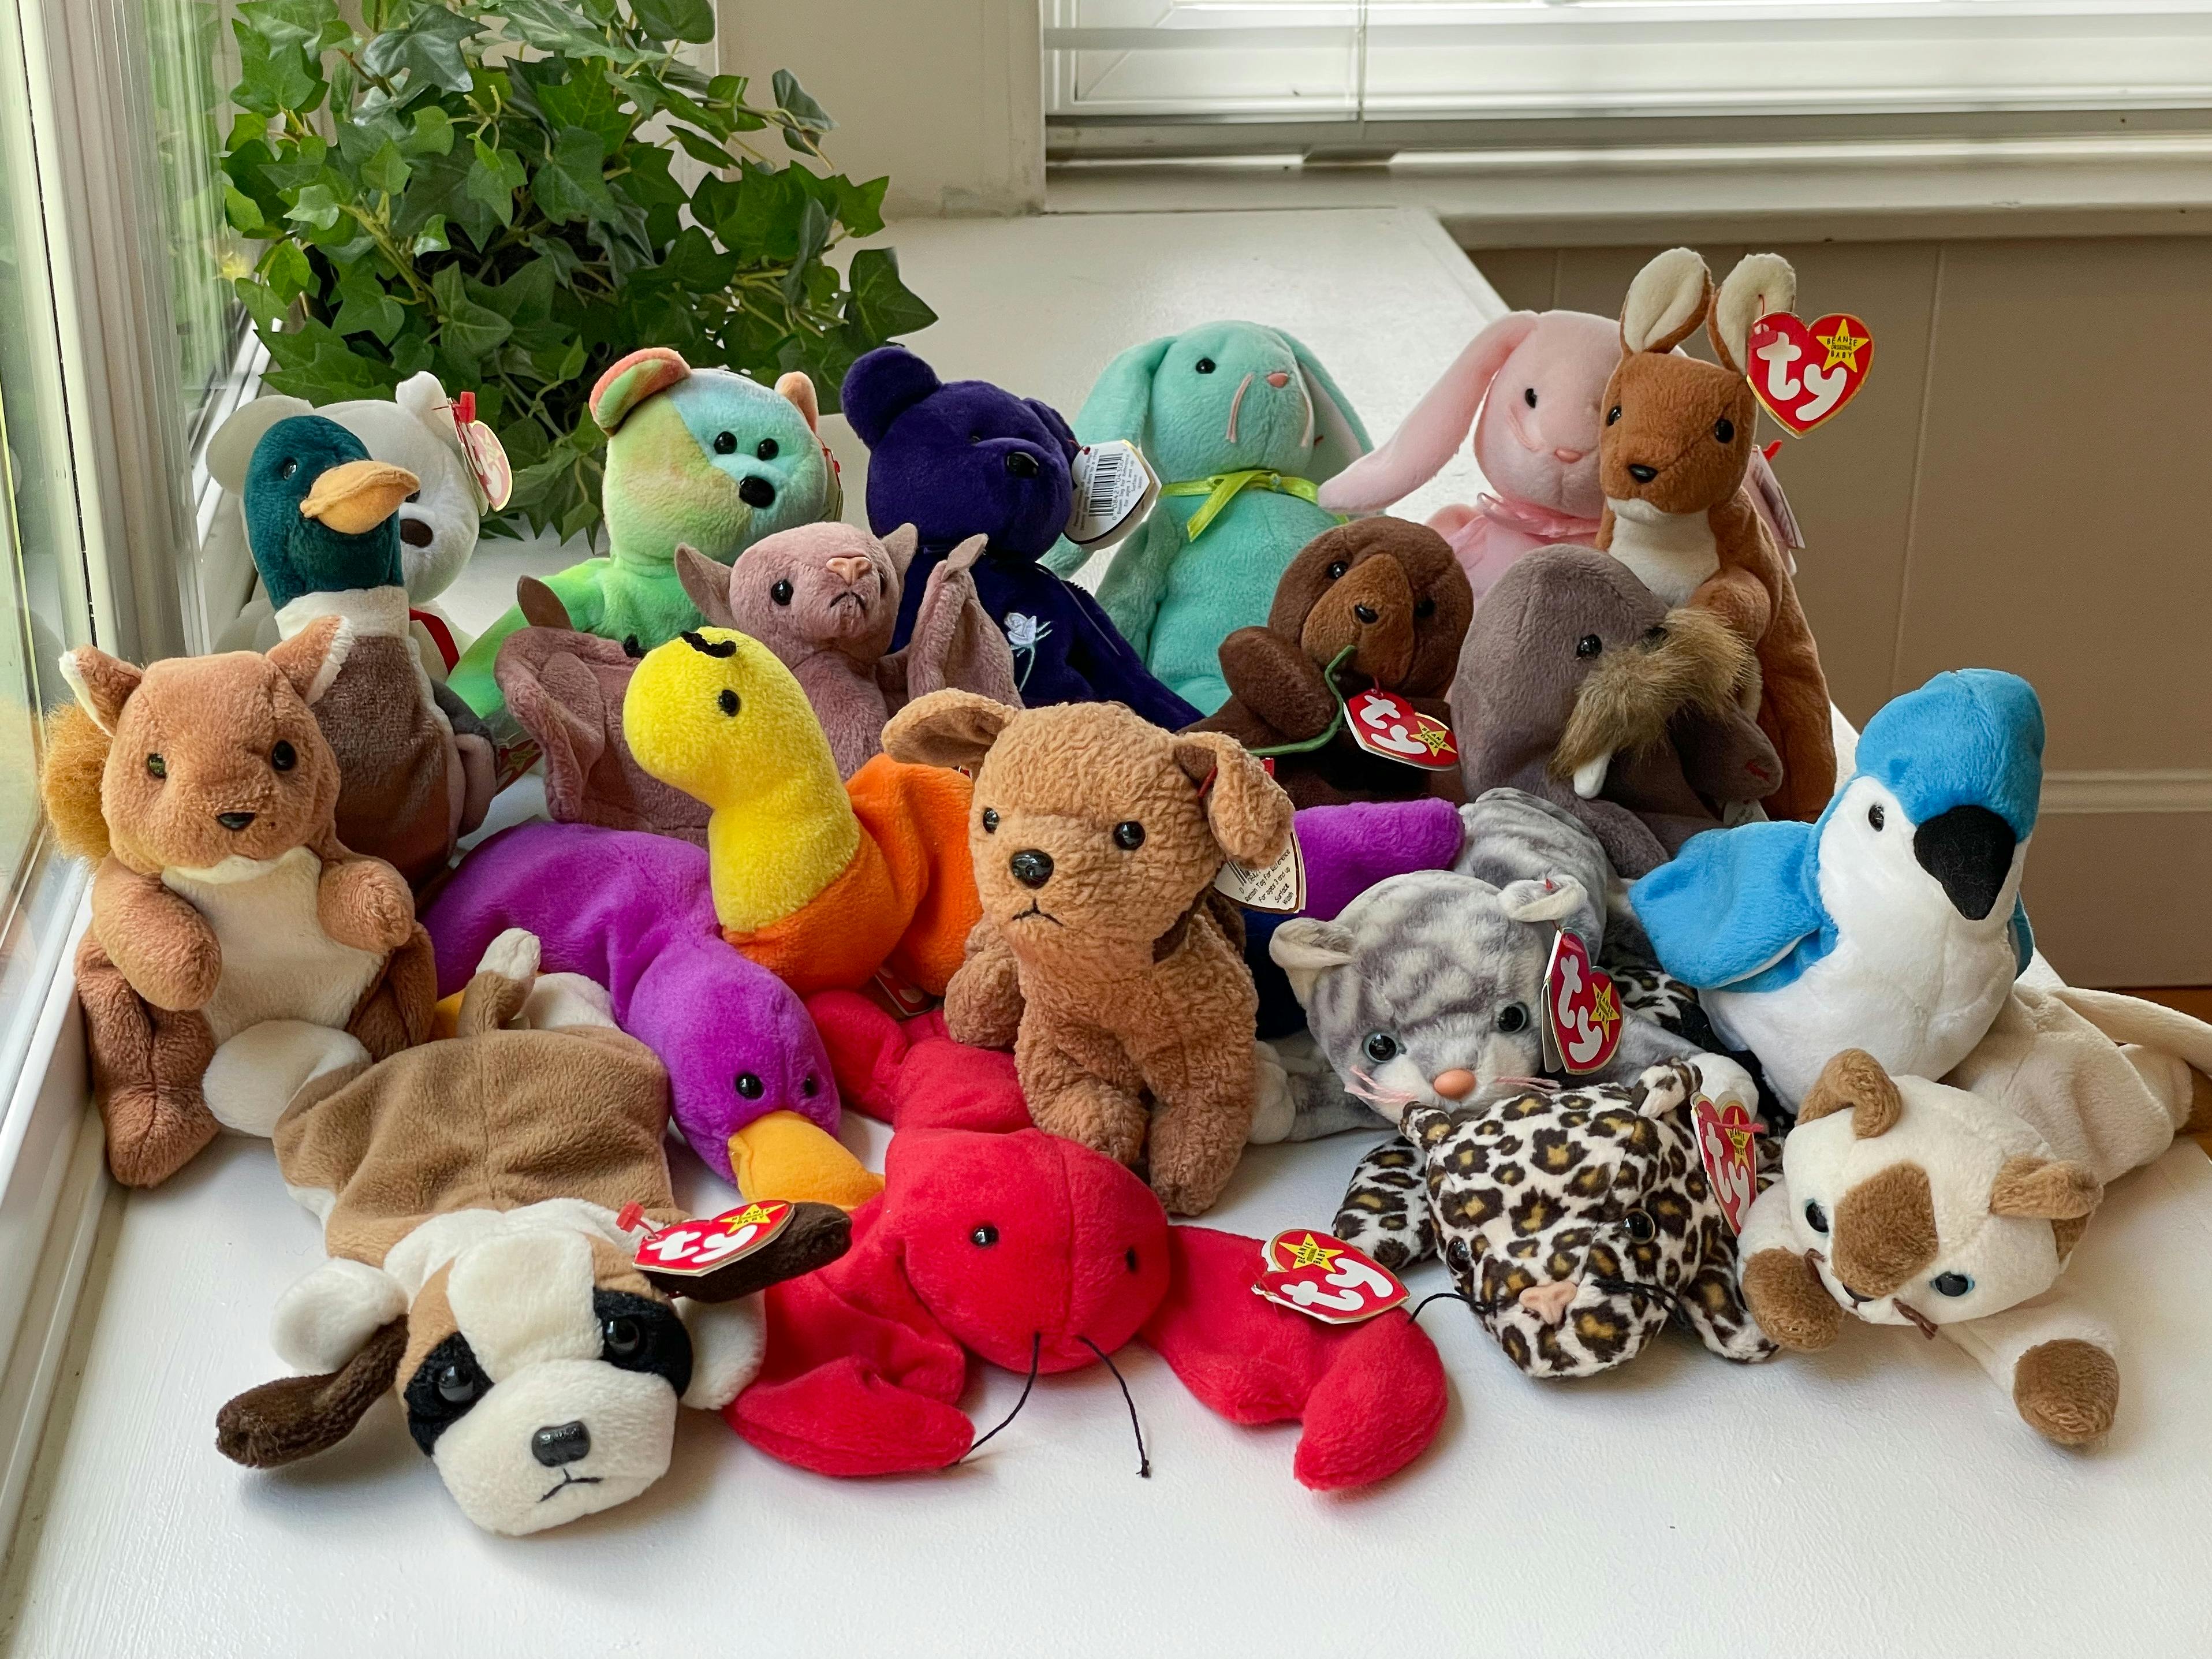 20 Most Valuable Beanie Babies Of All Time (Ranking)